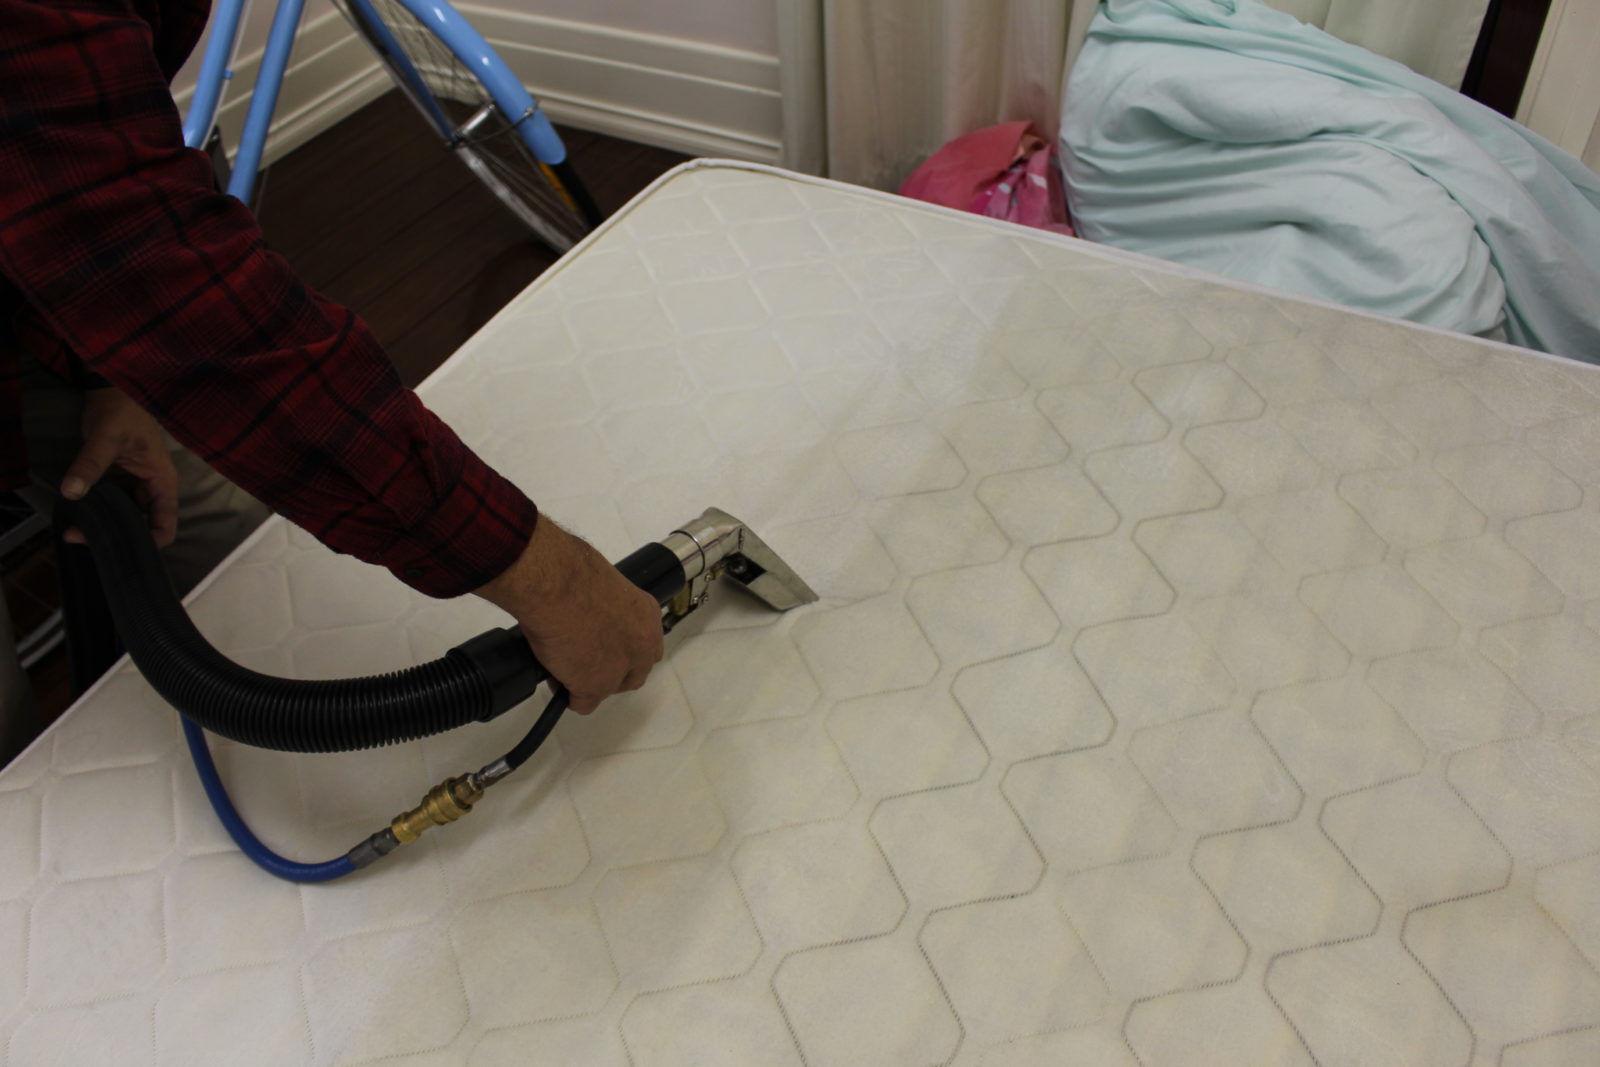 4 Common Mistakes We Make When Cleaning The Mattress